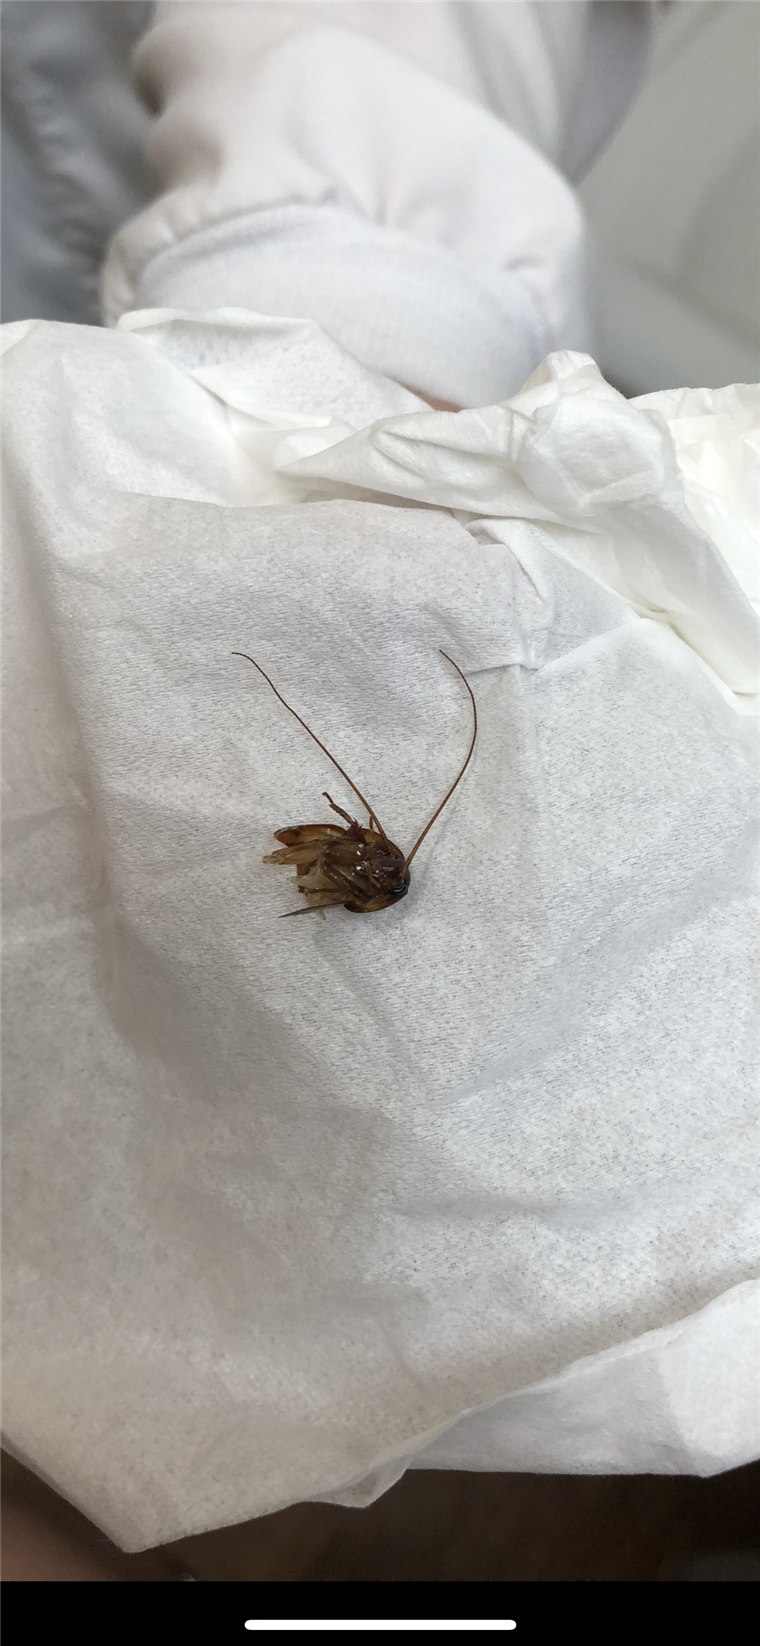 Katie Holley woke up with a cockroach stuck in her ear